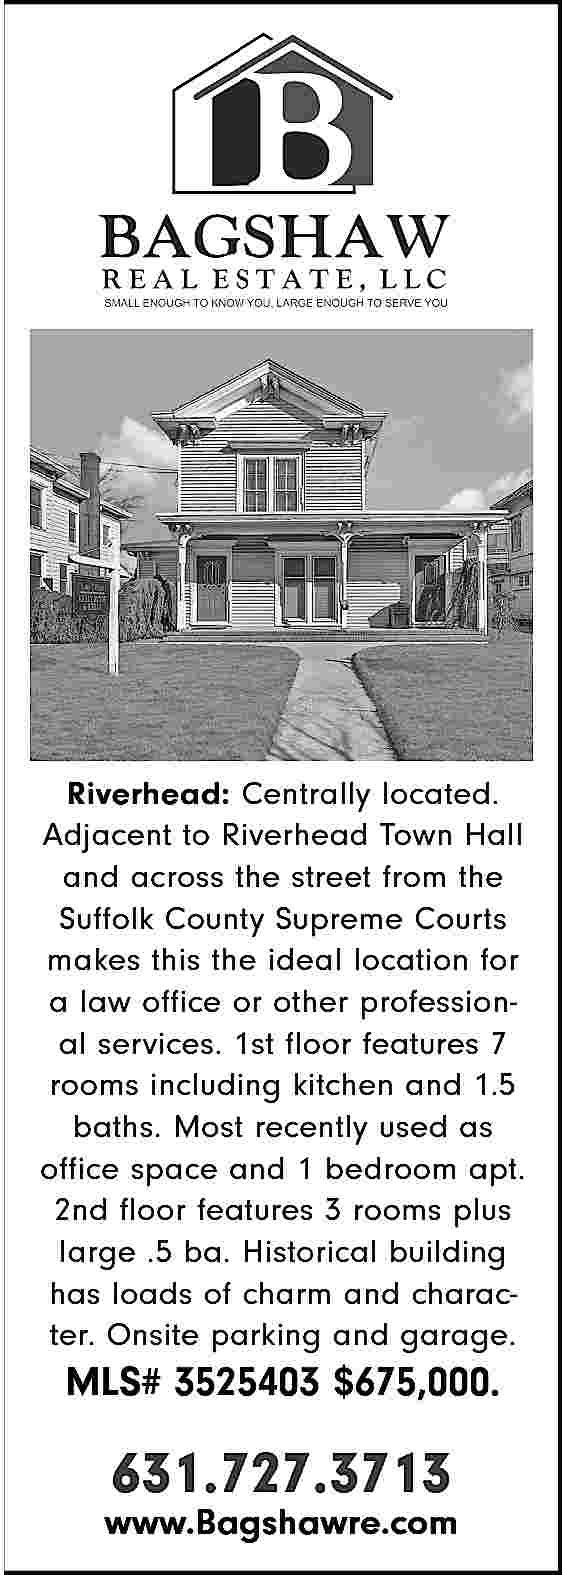 Riverhead: Centrally located. <br>Adjacent to  Riverhead: Centrally located.  Adjacent to Riverhead Town Hall  and across the street from the  Suffolk County Supreme Courts  makes this the ideal location for  a law office or other professional services. 1st floor features 7  rooms including kitchen and 1.5  baths. Most recently used as  office space and 1 bedroom apt.  2nd floor features 3 rooms plus  large .5 ba. Historical building  has loads of charm and character. Onsite parking and garage.    MLS# 3525403 $675,000.    631.727.3713    www.Bagshawre.com     